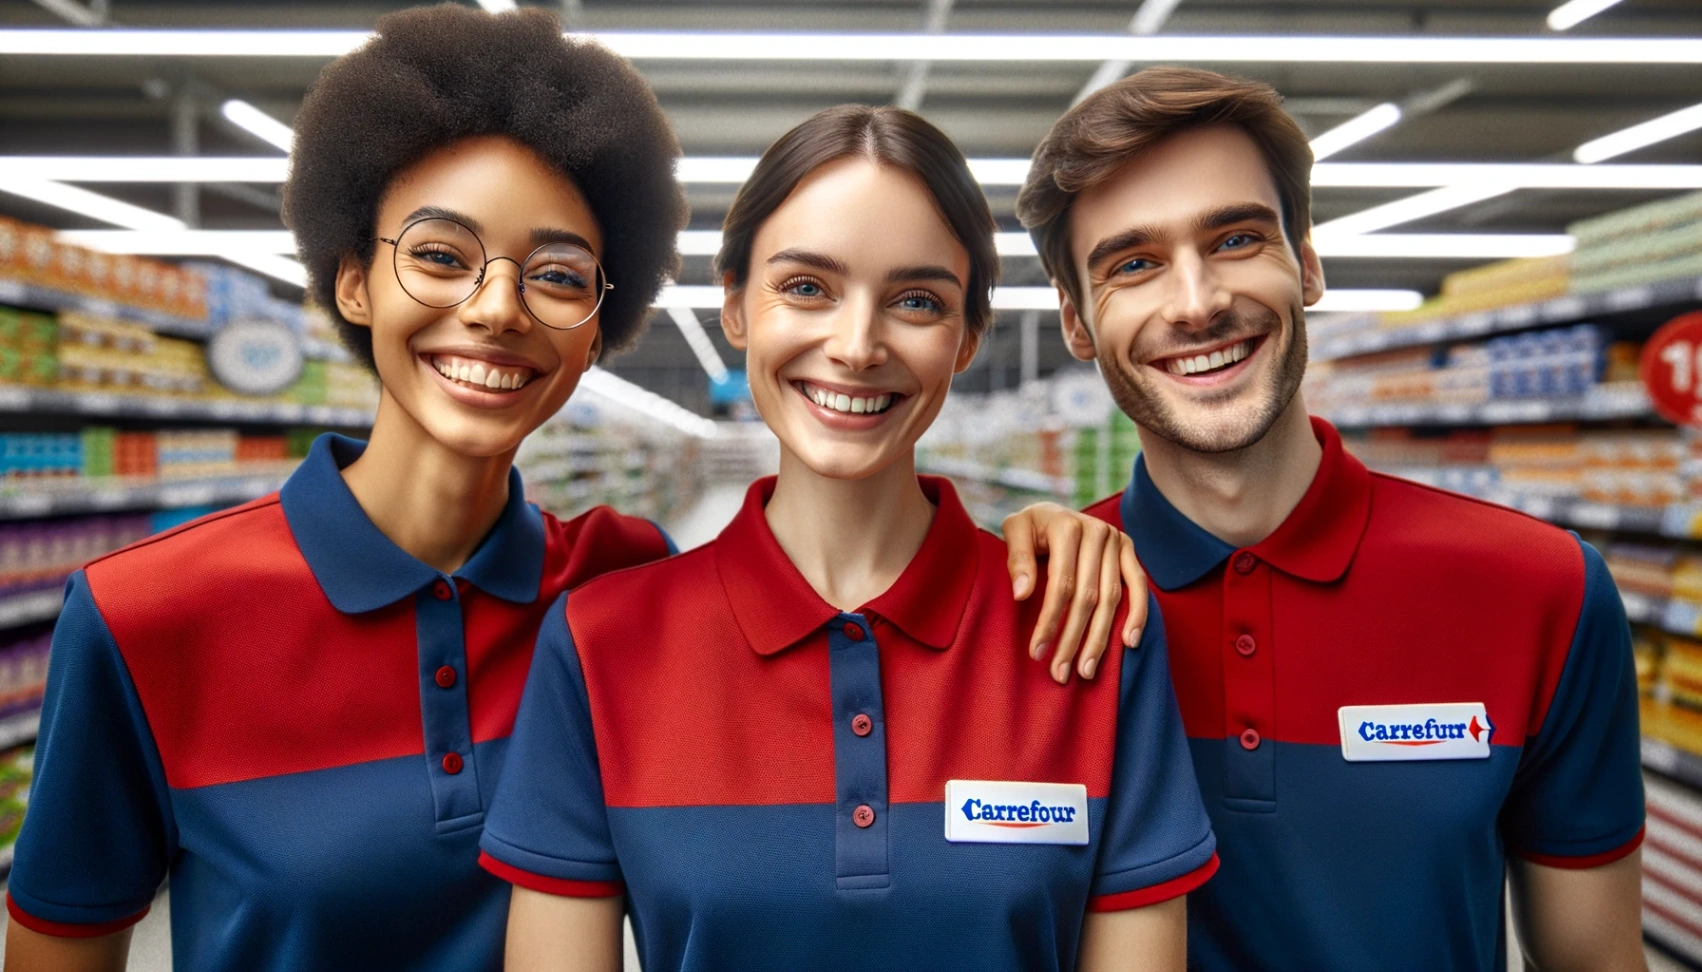 Carrefour is Hiring - How to Apply for a Carrefour Jobs